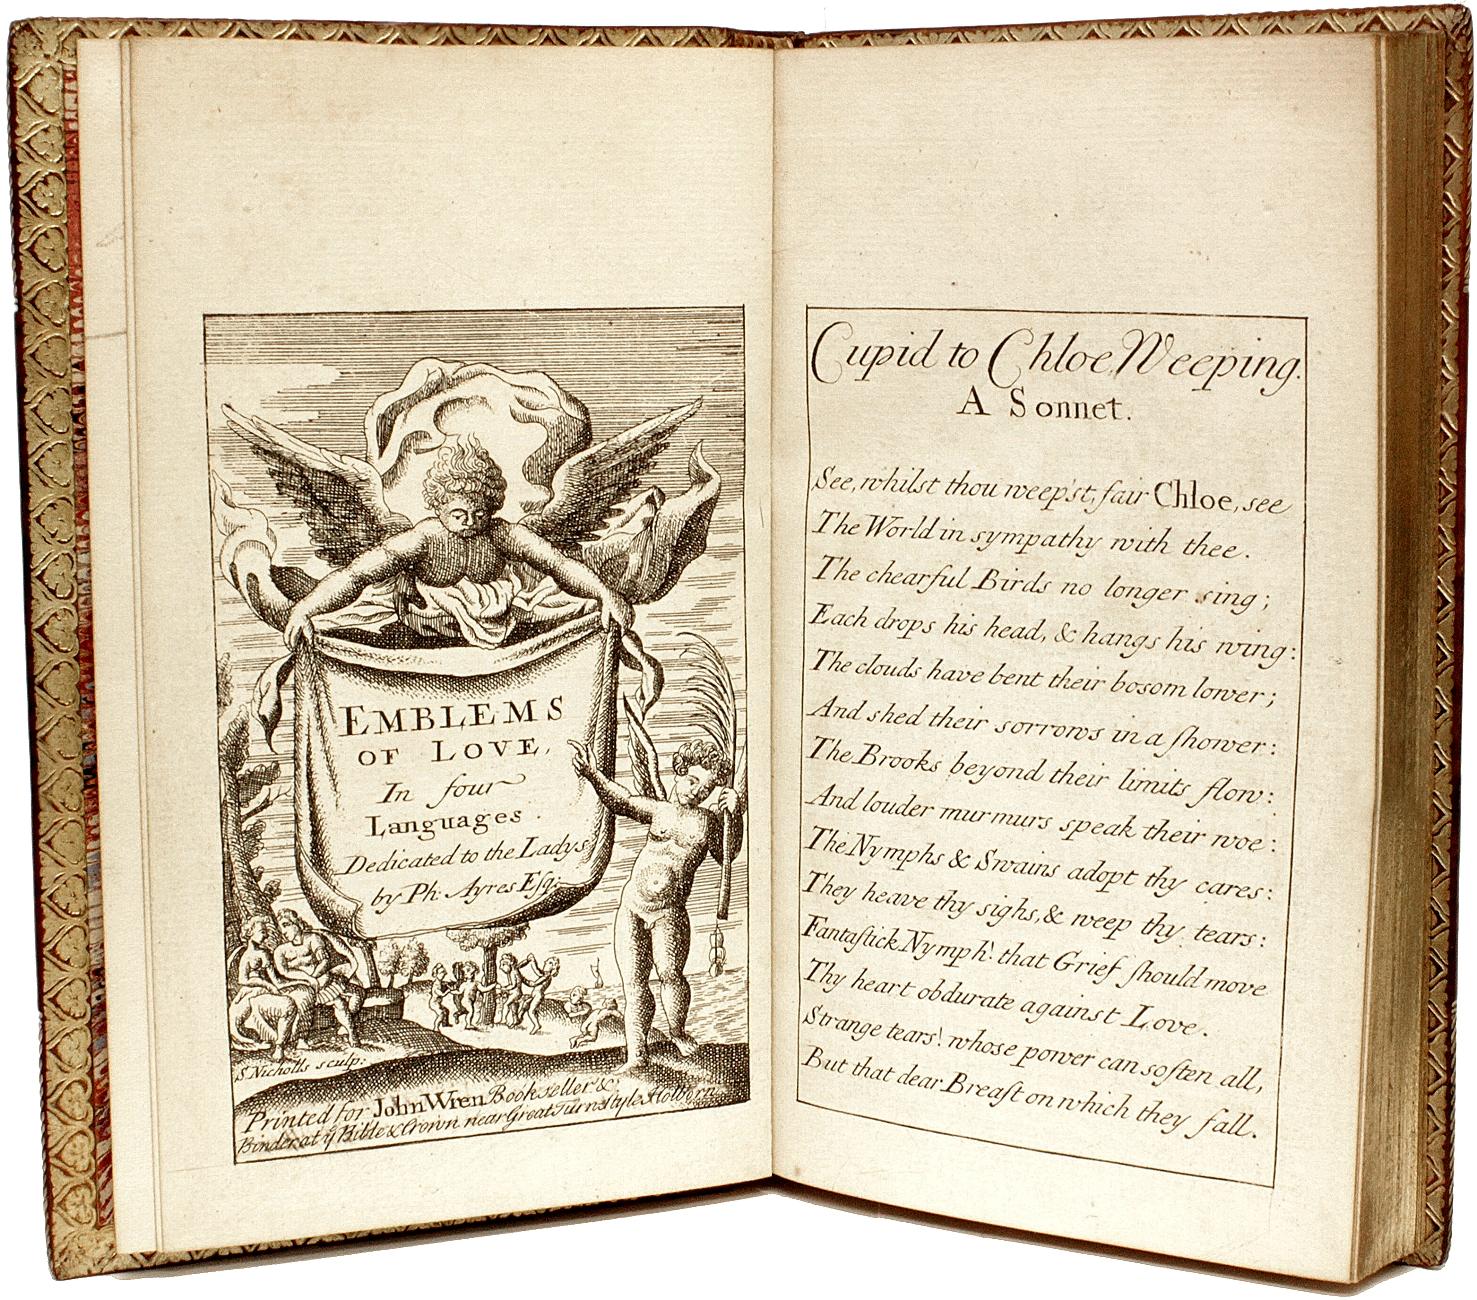 Ayres, Philip, Emblems of Love, 1750, in a Fine Full Leather Binding For Sale 1